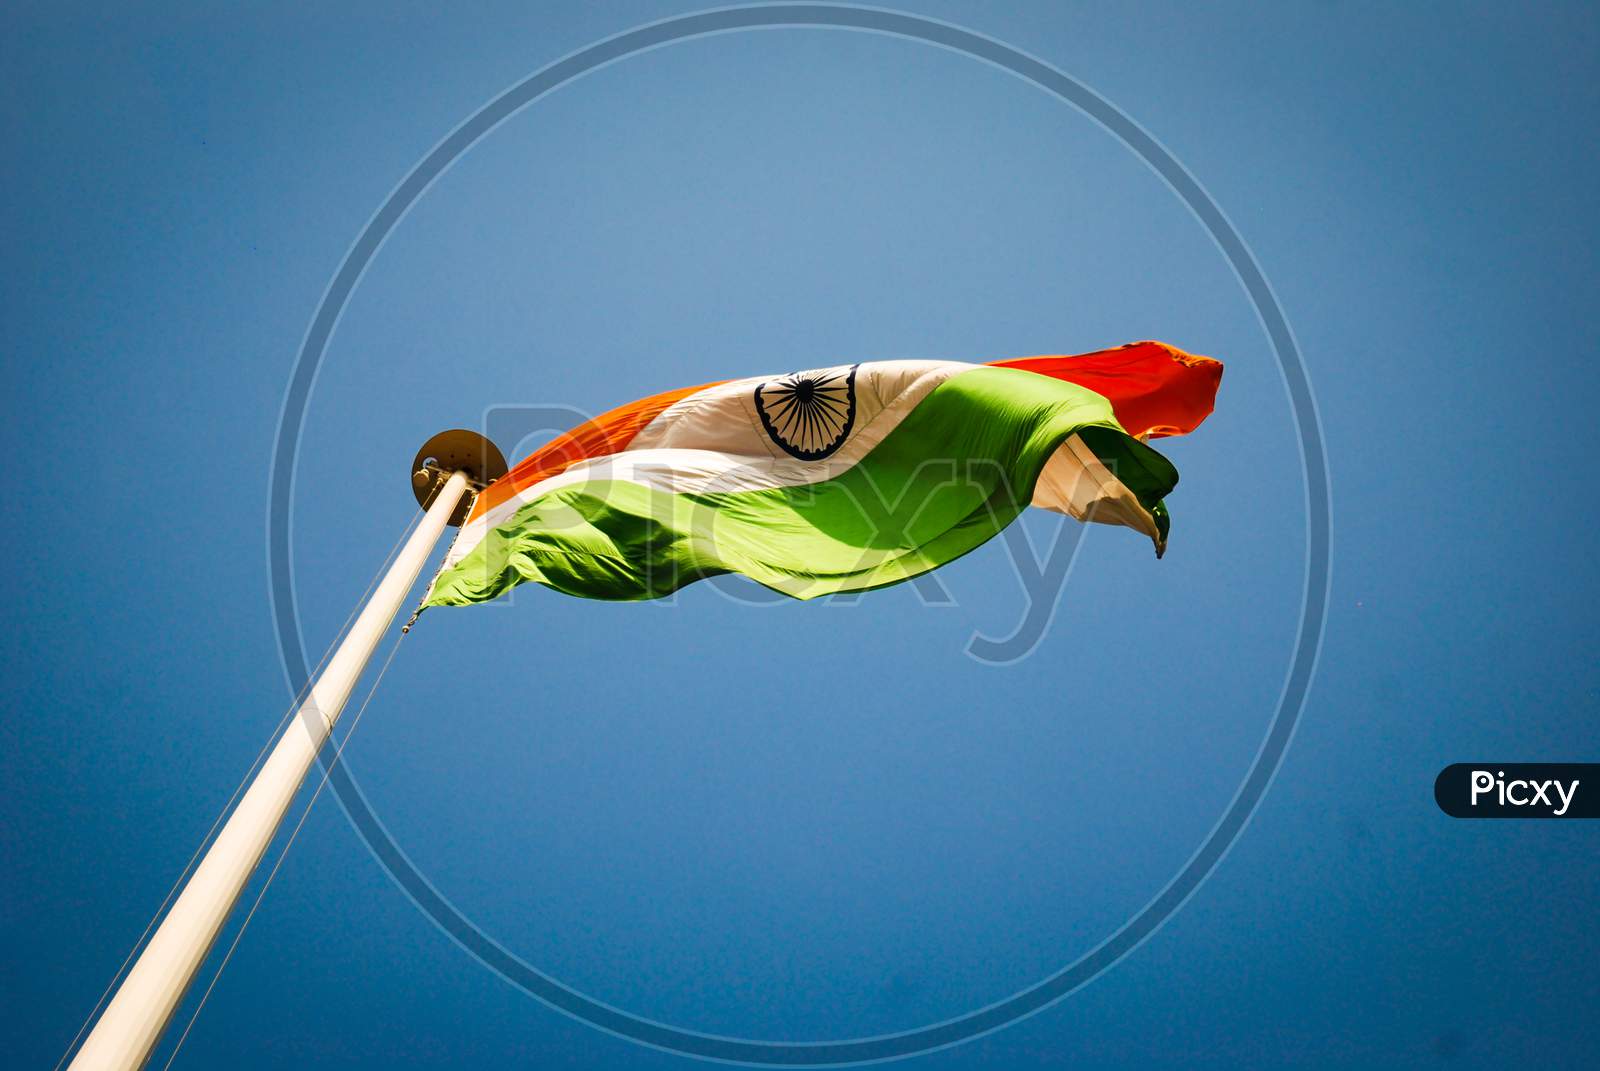 Indian flag flying in the sky